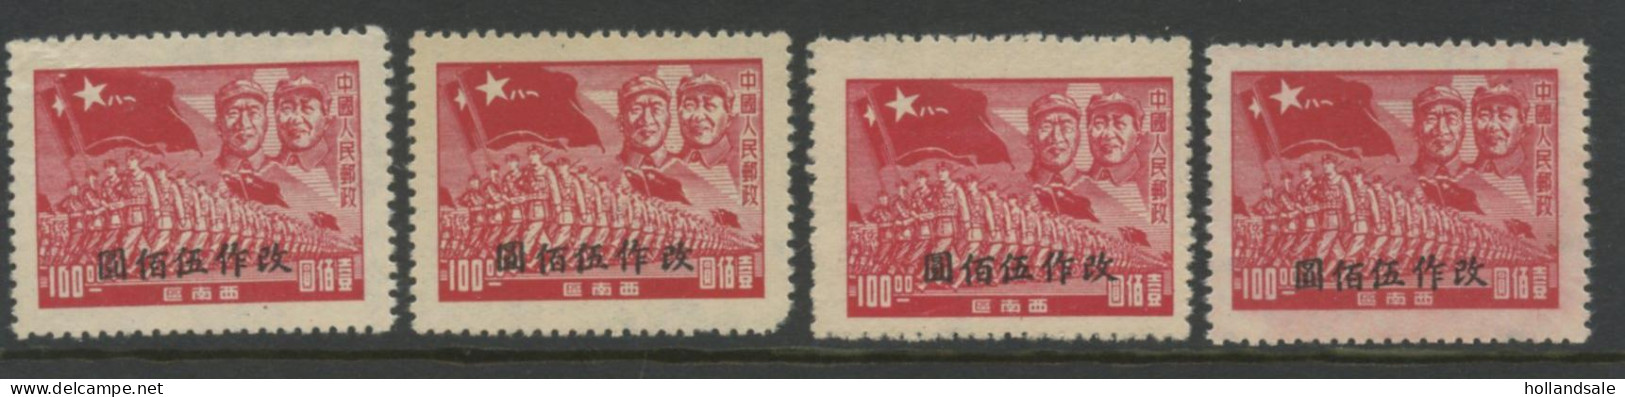 CHINA SOUTH WEST - 1950 $500 On $100 MICHEL # 36. Four (4) X. Unused. - South-Western China 1949-50